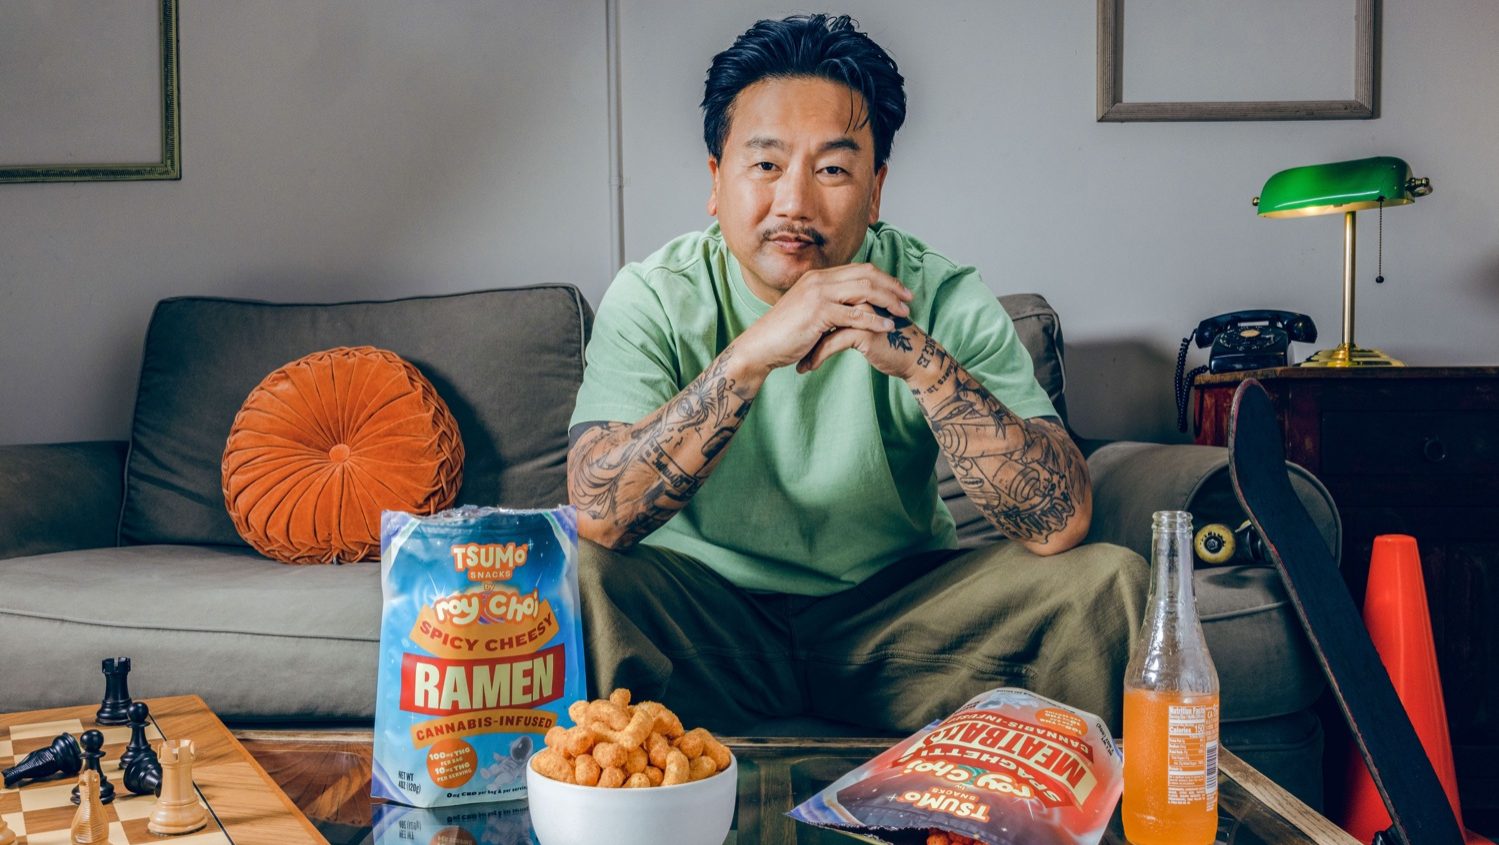 Chef Roy Choi Releases Spaghetti & Meatballs and Spicy Cheese Ramen Flavored Edibles